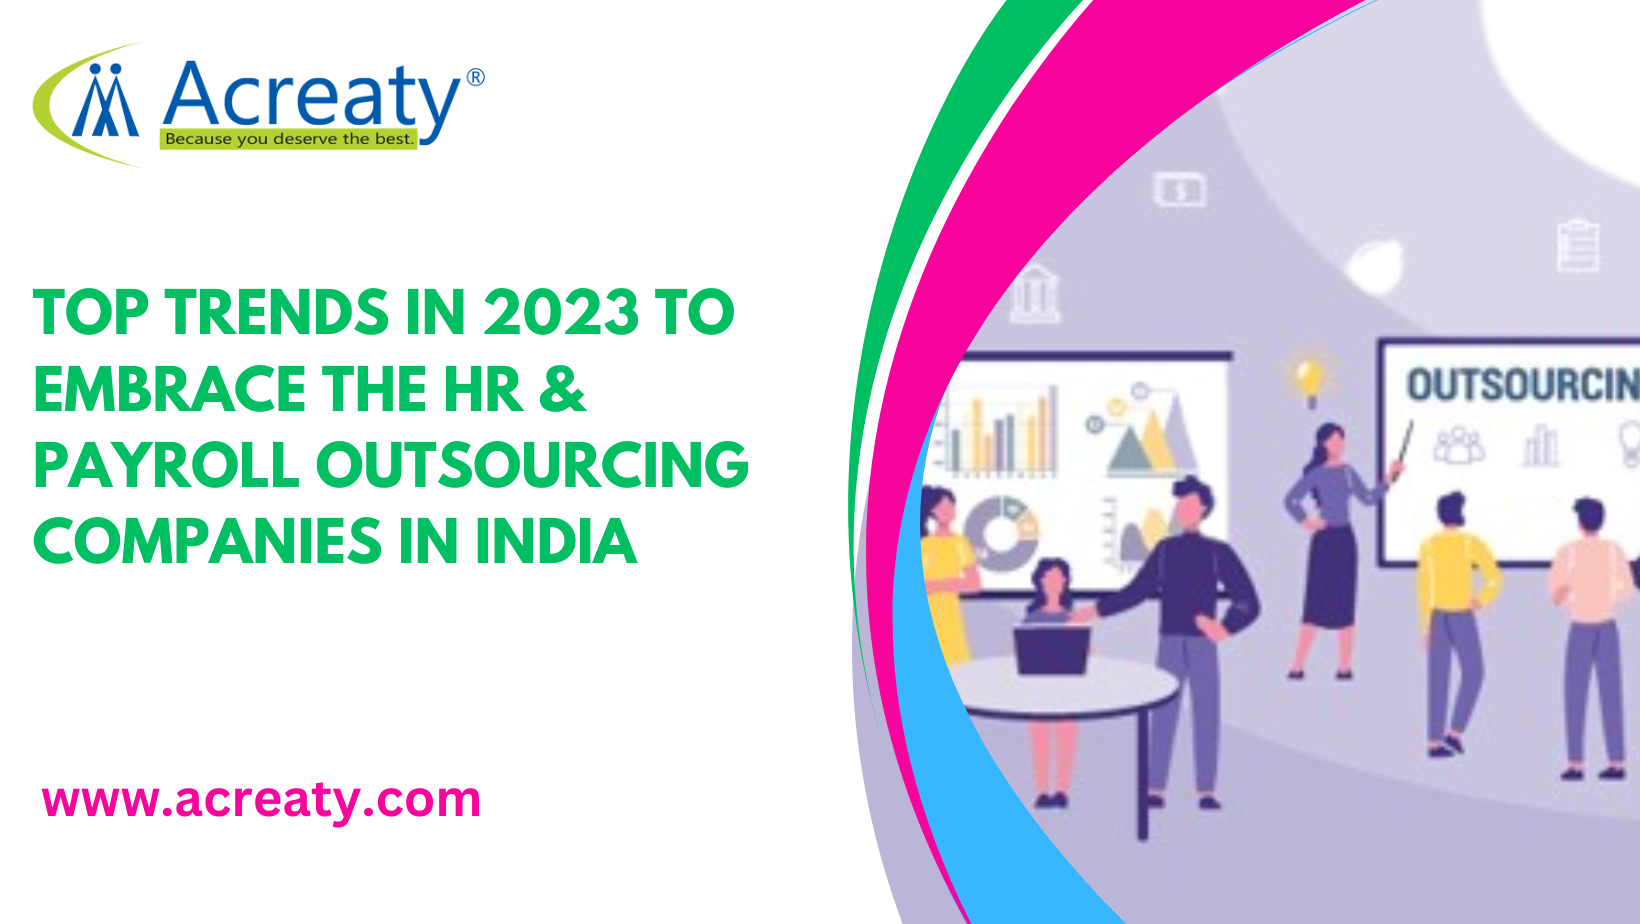 Top trends in 2023 to embrace the HR & payroll outsourcing companies in India